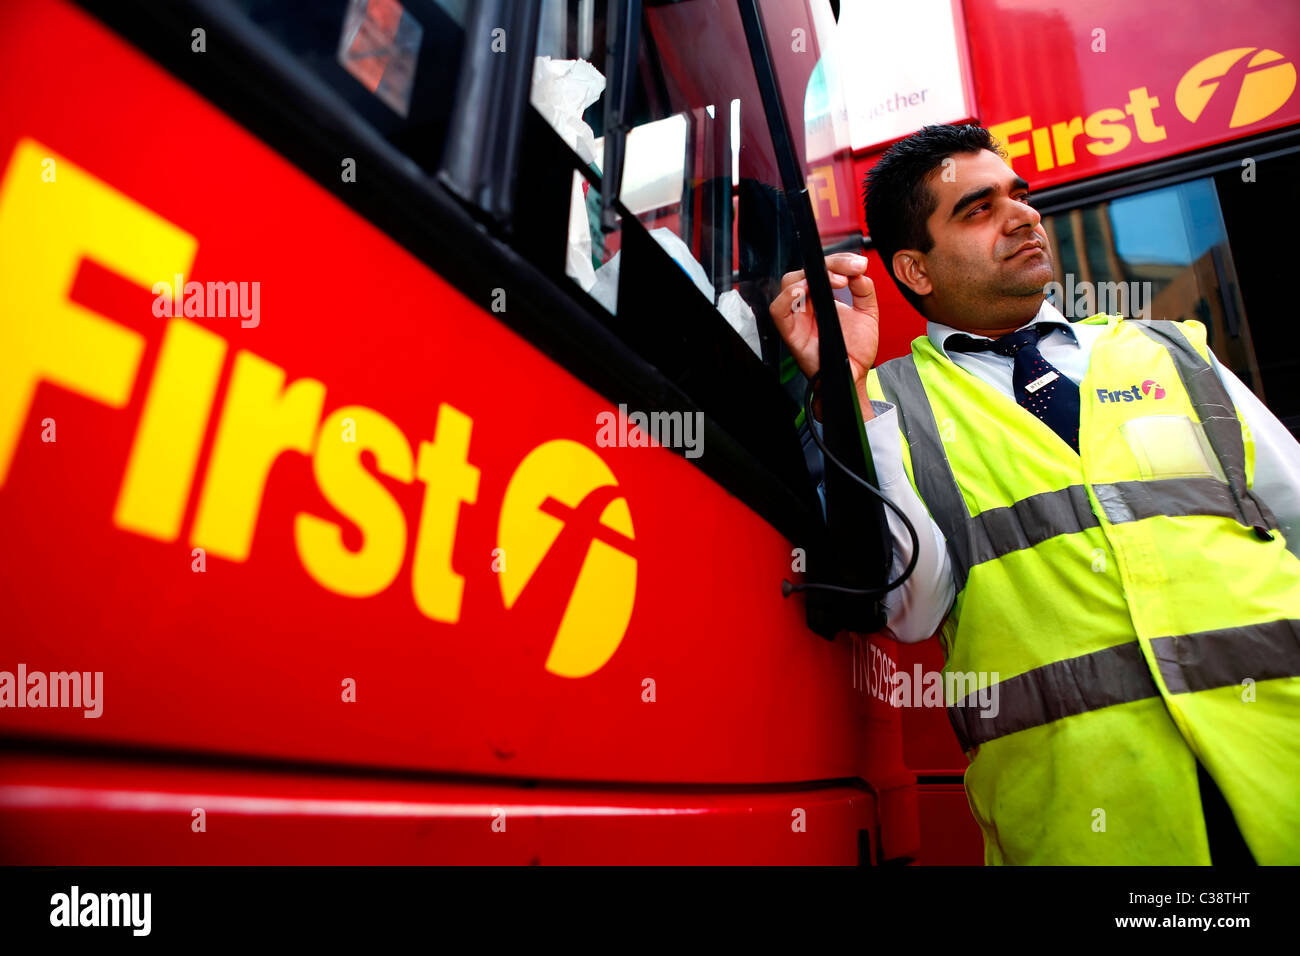 A First Group bus driver in a high visibility vest with two First Group buses at Aldgate bus station, Central London. Stock Photo